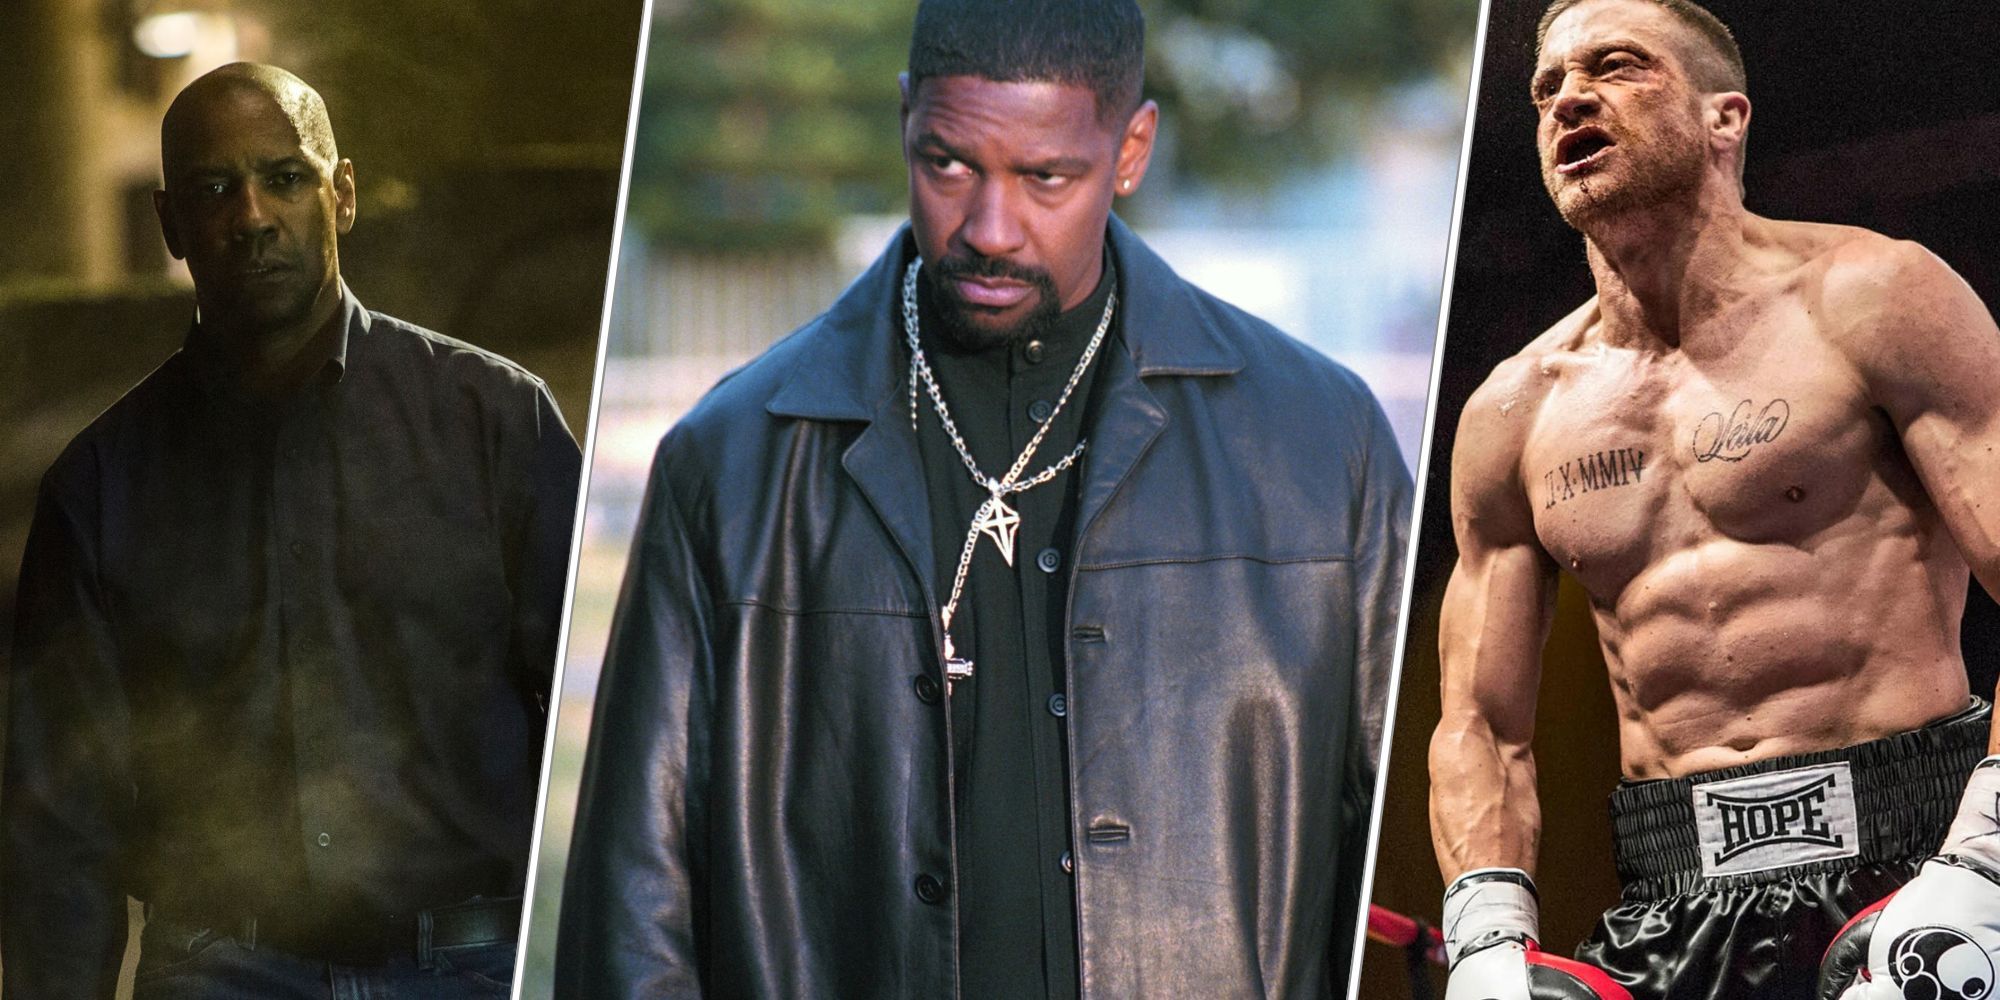 Denzel Washington in 'The Equalizer' and 'Training Day' and Jake Gyllenhaal in 'Southpaw'